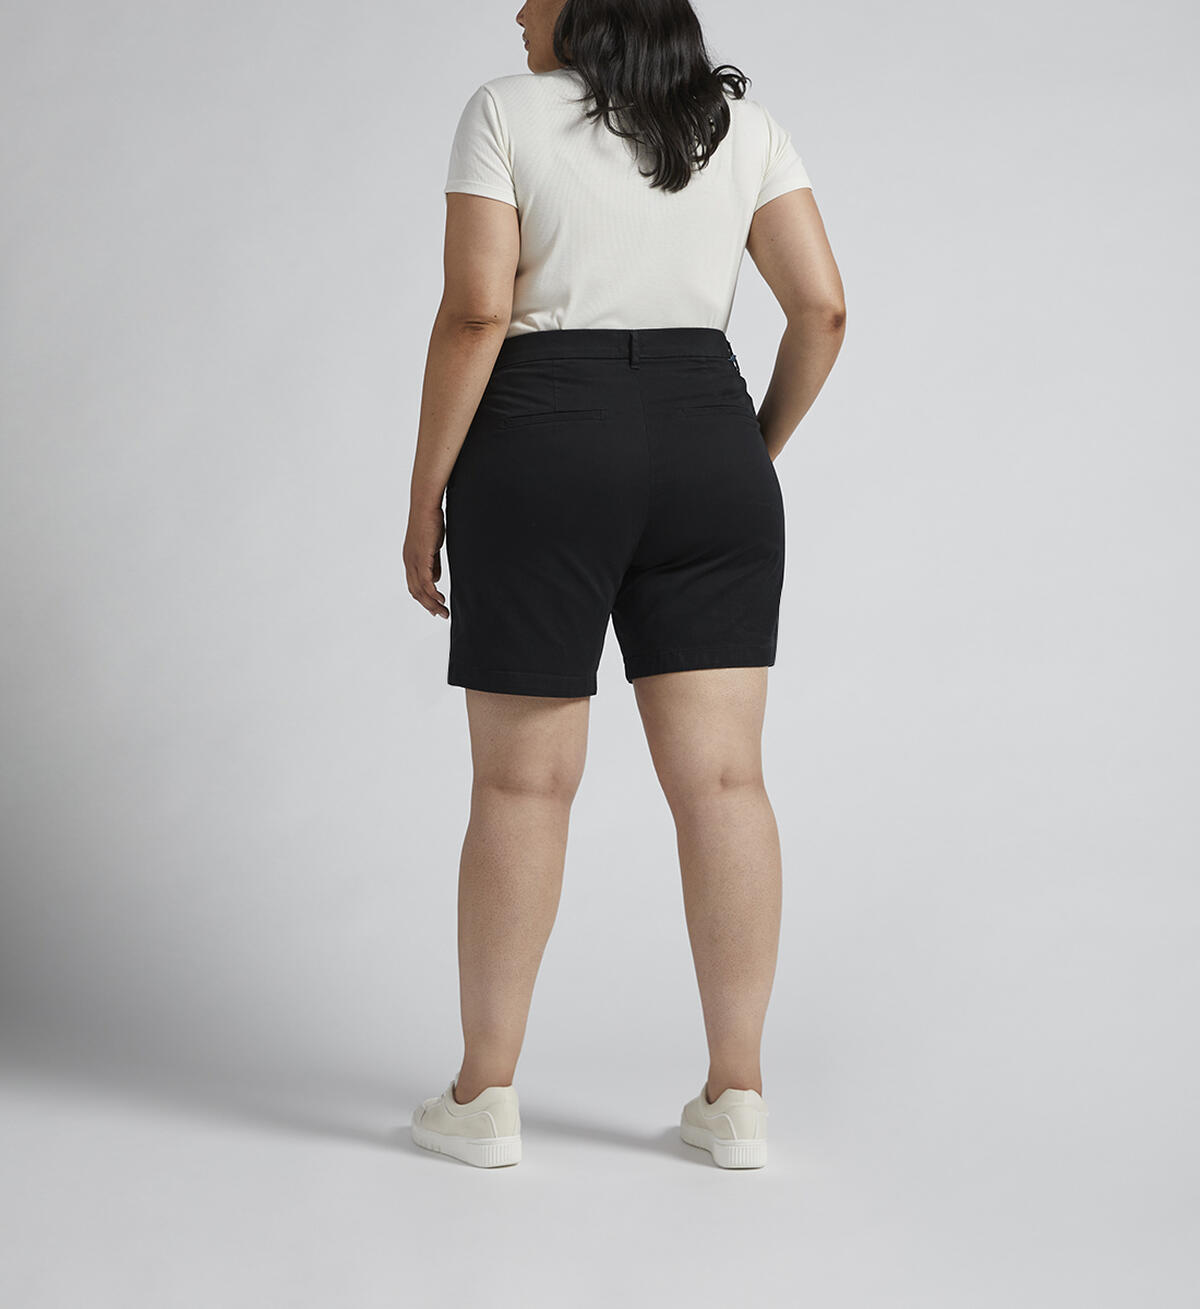 Maddie Mid Rise 8-inch Pull-On Short Plus Size, Black, hi-res image number 1